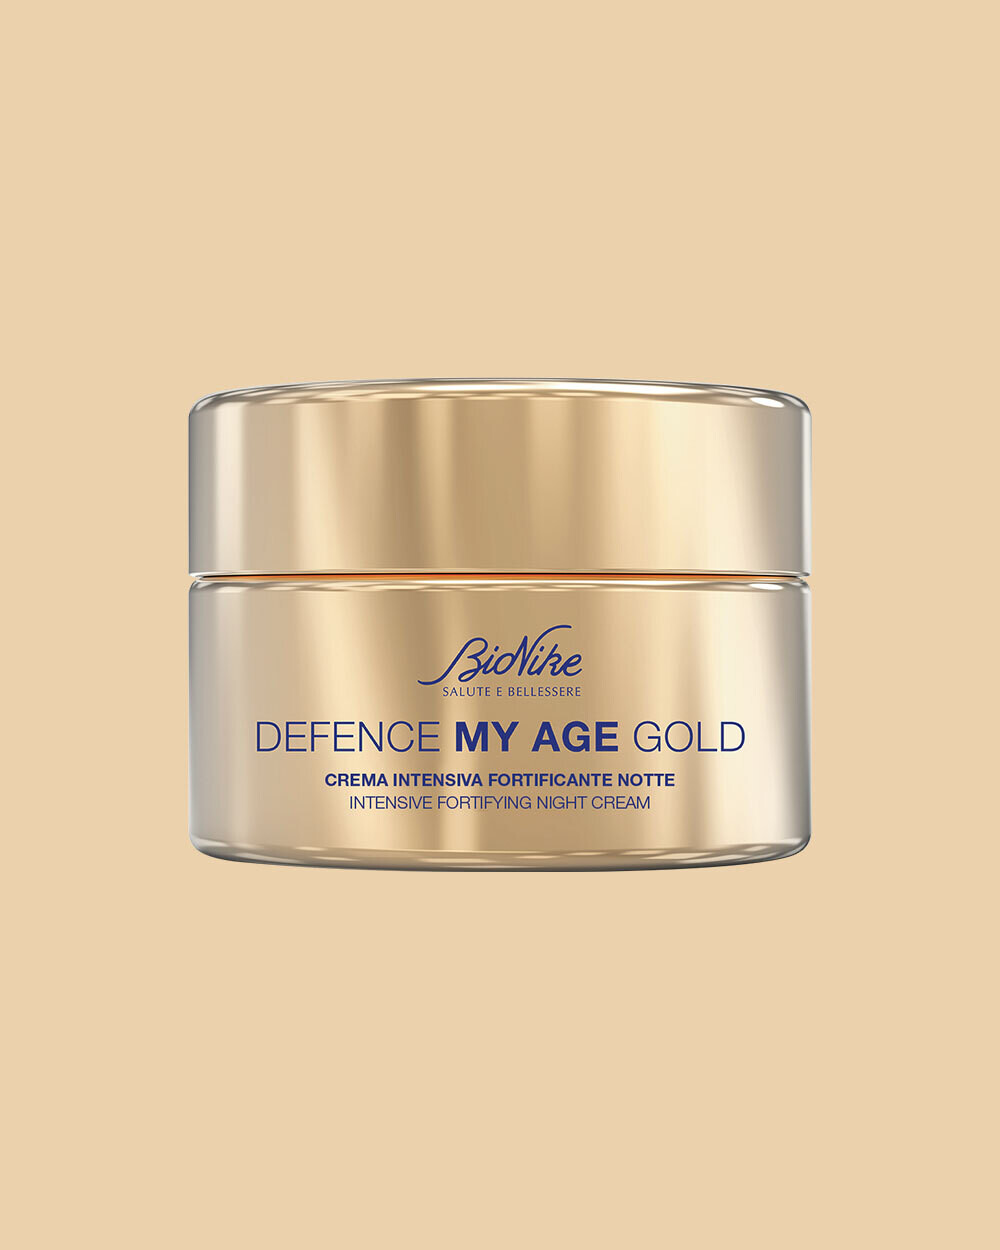 DEFENCE MY AGE GOLD CREMA INTENSIVA FORTIFICANTE NOTTE 50 ml